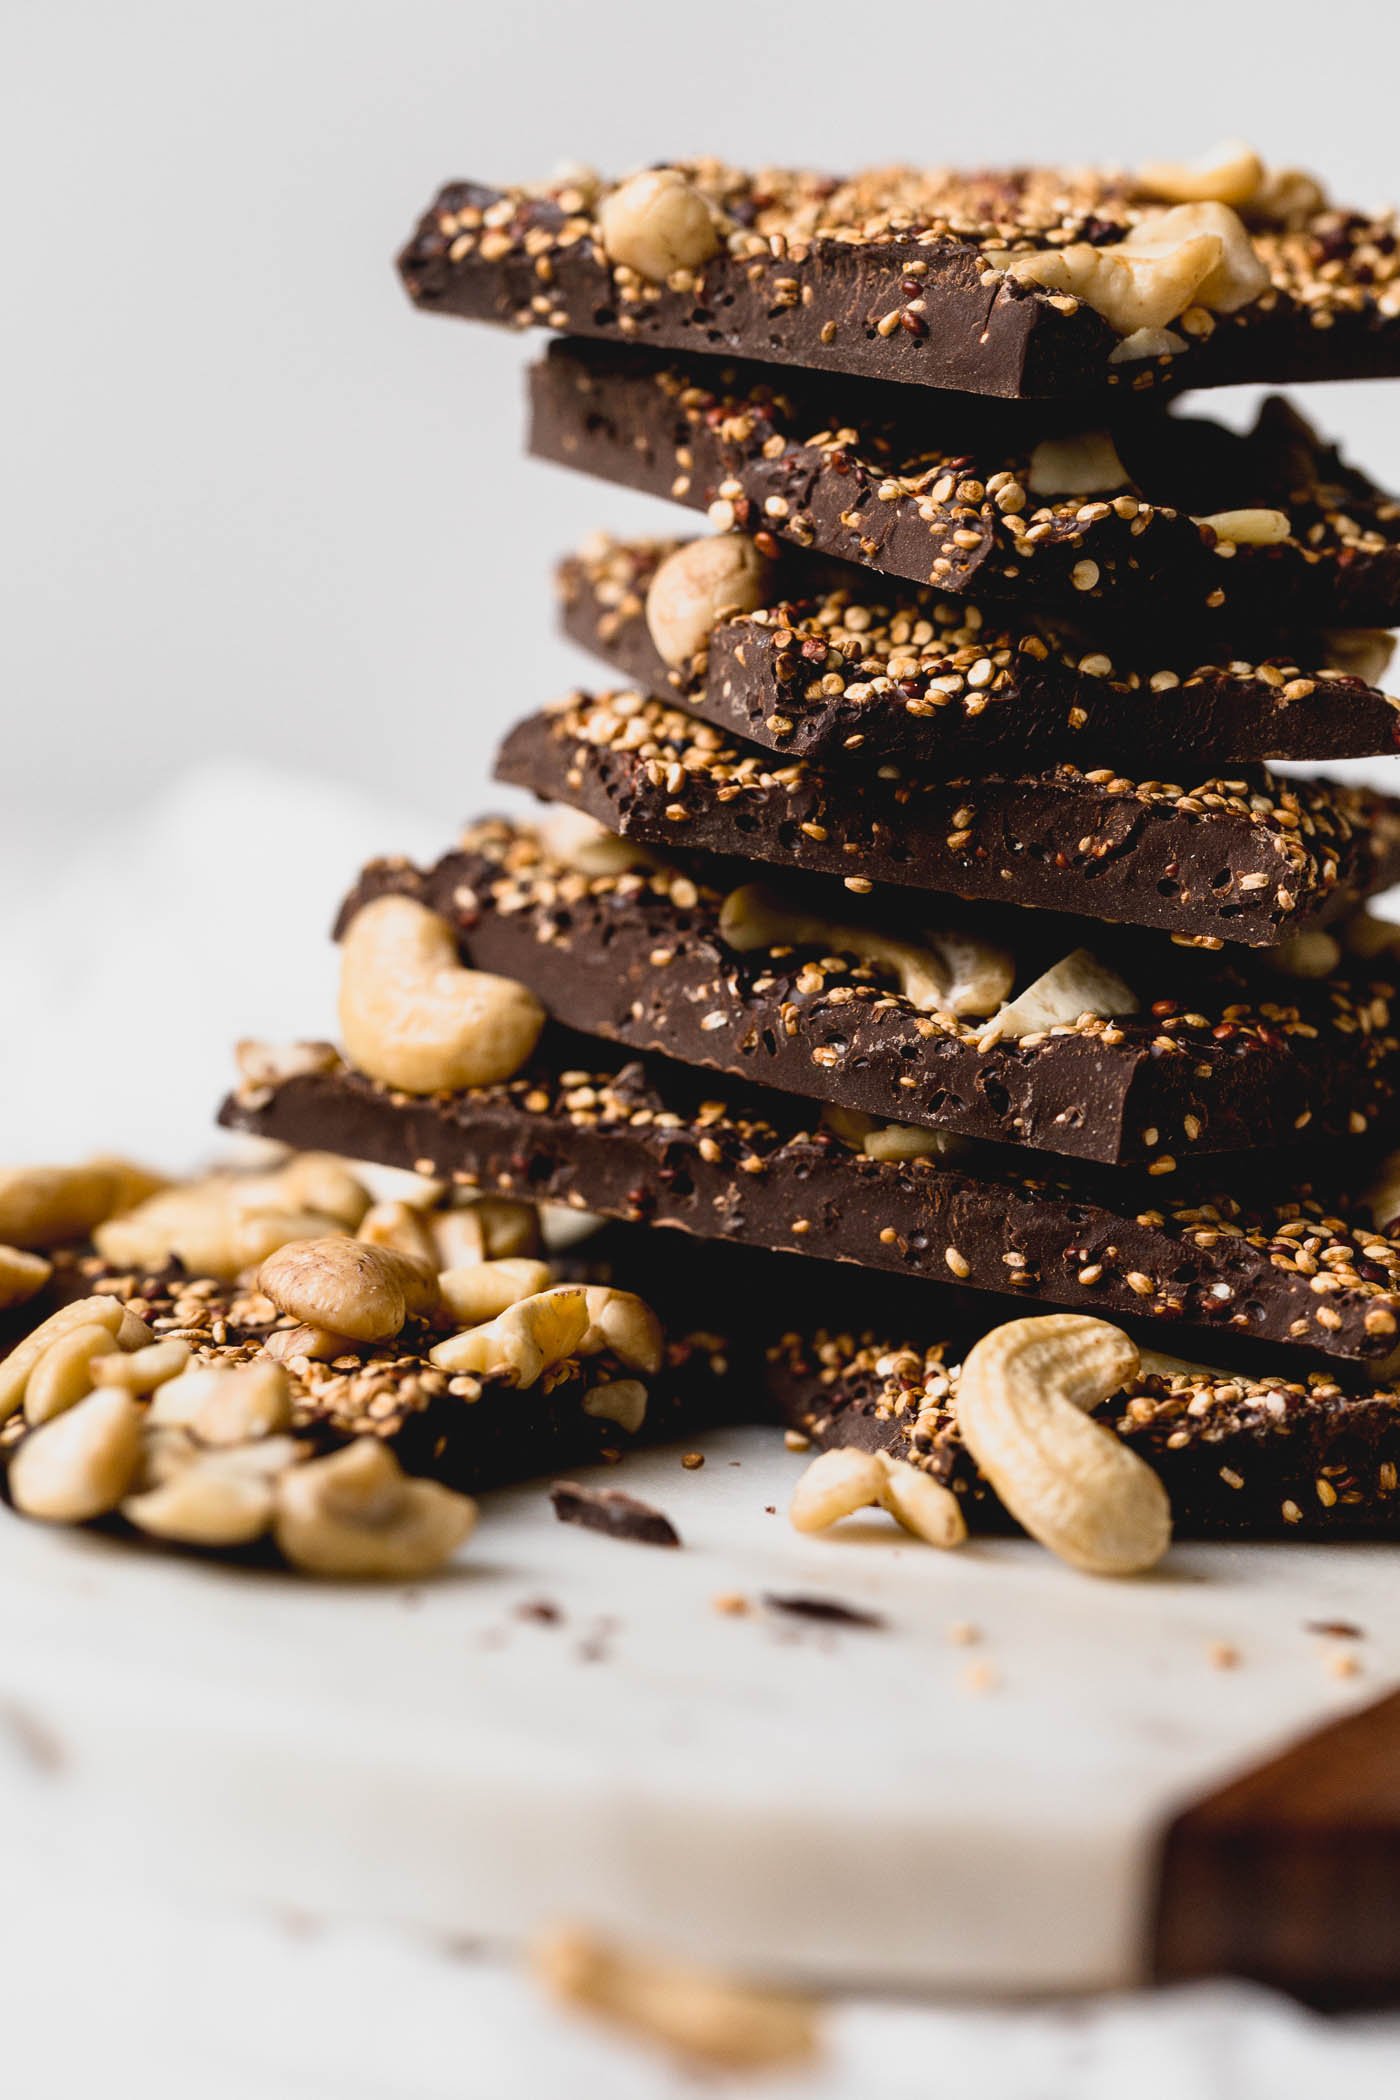 a simple & healthy three-ingredient dark chocolate bark recipe with toasted quinoa folded throughout a thick layer of dark chocolate and topped with cashews. this superfood dark chocolate bark has it all - plant-based protein, antioxidants, & healthy fats - what more could you want out of a healthy little on-the-go snack or dessert? #darkchocolatebark #chocolatebarkrecipe #healthychocolatebark #healthydessert #superfoodsnacks #healthysnack #toastedquinoa #cashews #darkchocolate